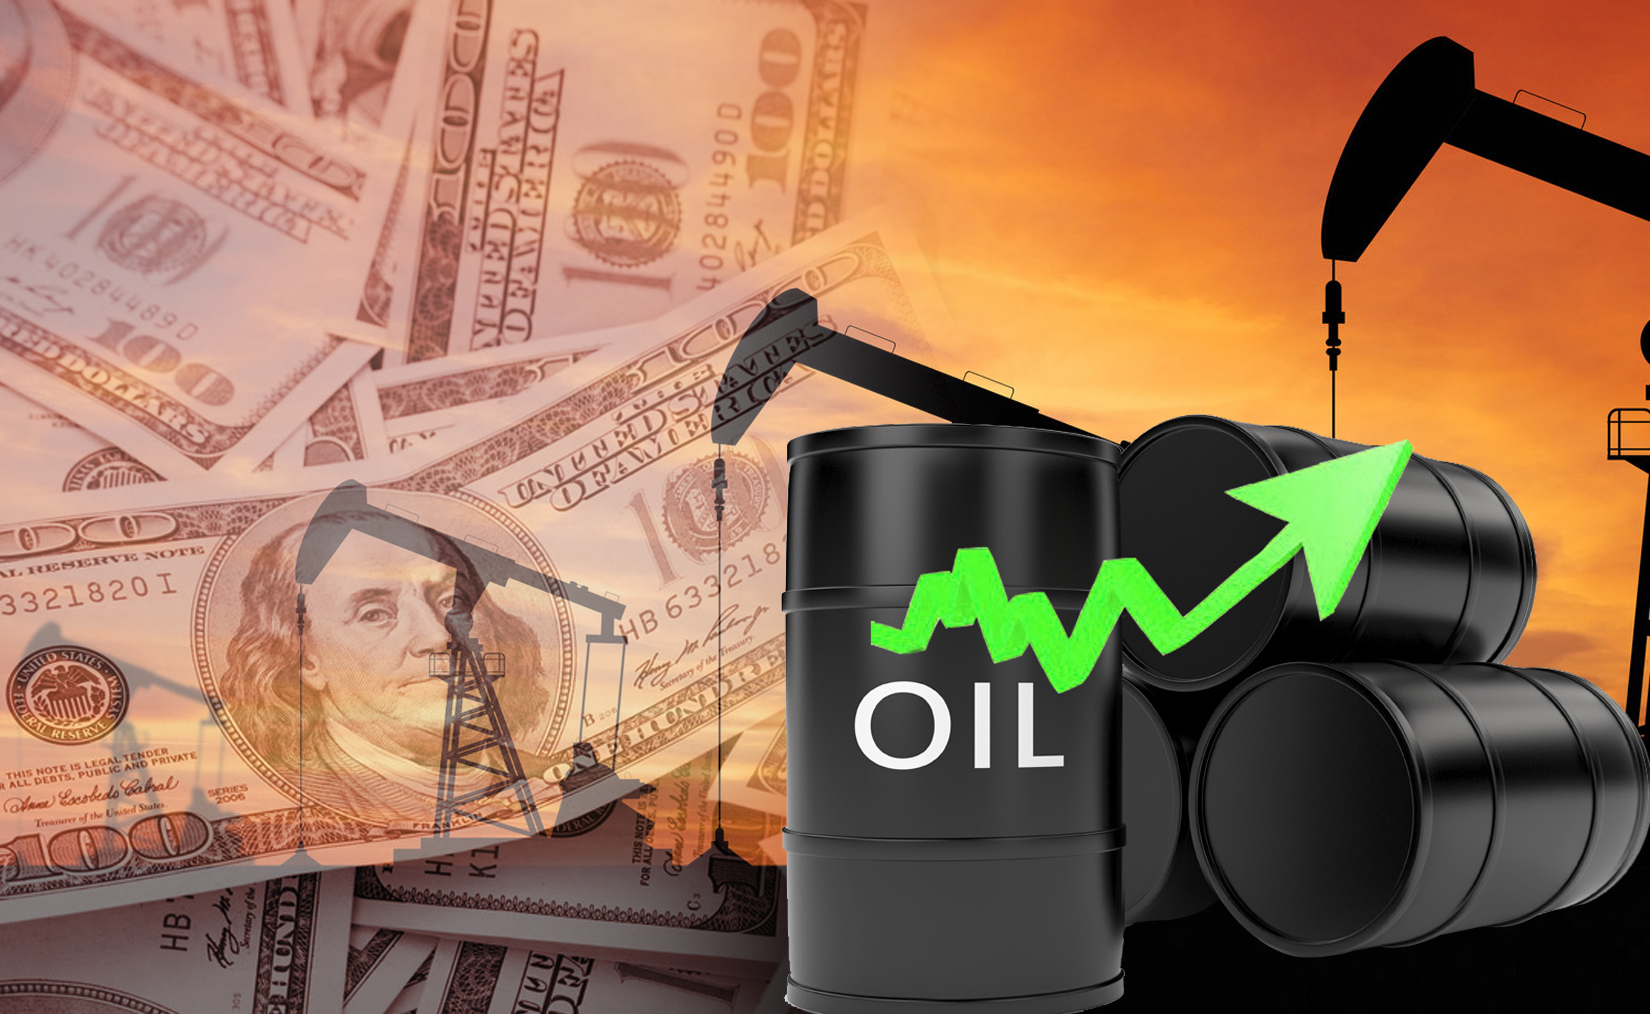 Kuwait oil price up 57 cents to USD 84.41 pb                                                                                                                                                                                                              